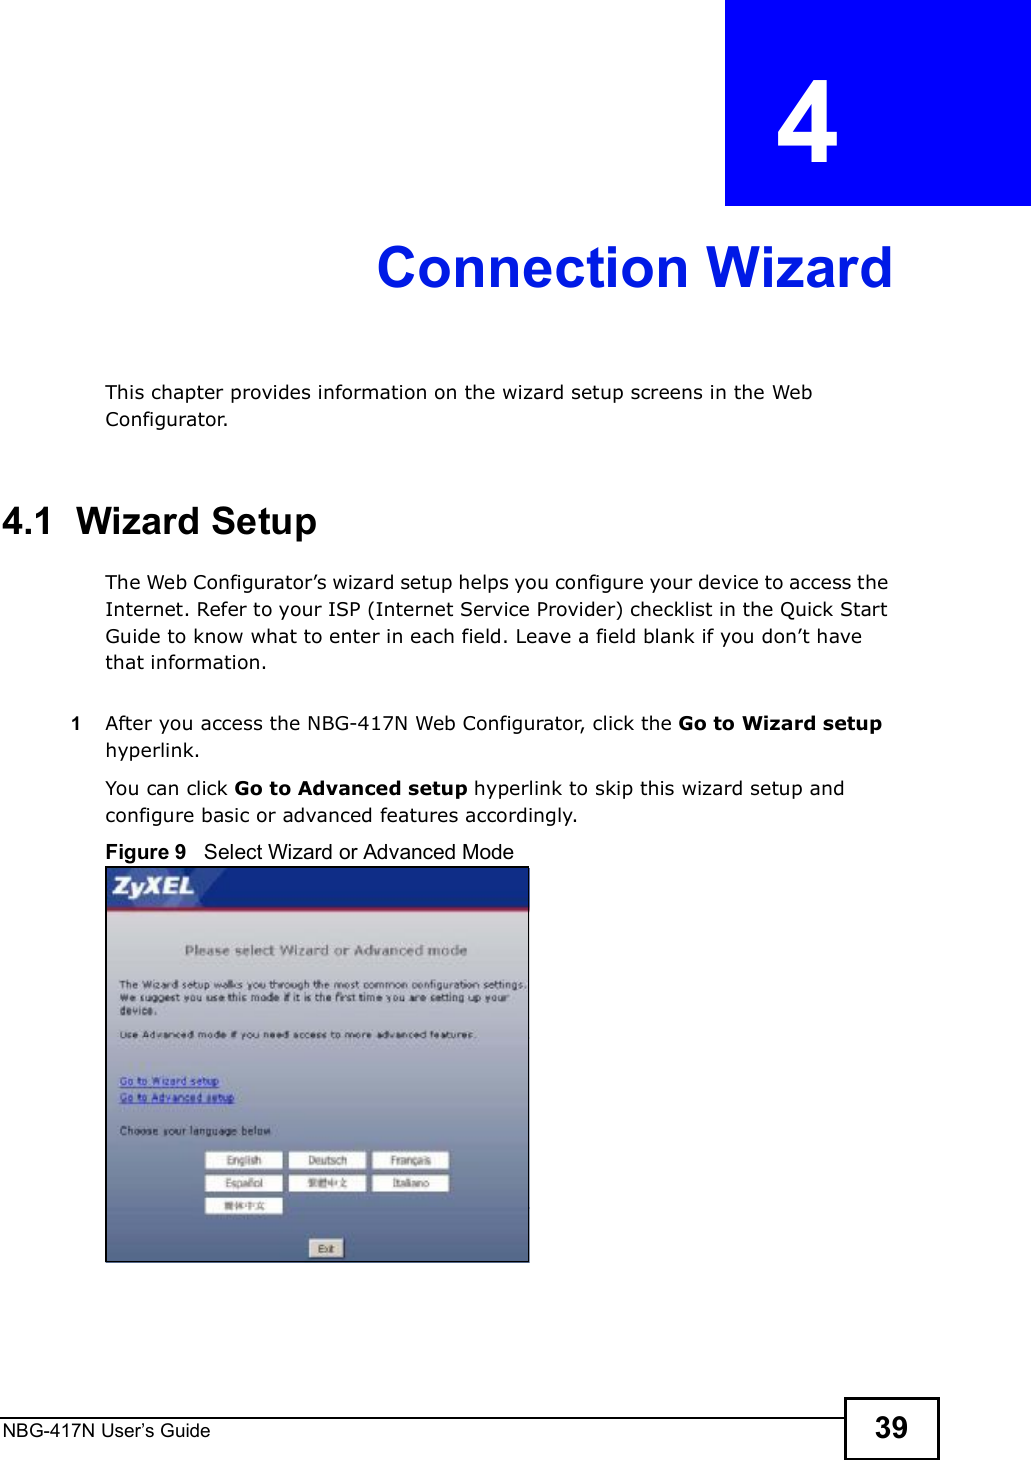 NBG-417N User s Guide 39CHAPTER  4 Connection WizardThis chapter provides information on the wizard setup screens in the Web Configurator.4.1  Wizard SetupThe Web Configurator!s wizard setup helps you configure your device to access the Internet. Refer to your ISP (Internet Service Provider) checklist in the Quick Start Guide to know what to enter in each field. Leave a field blank if you don!t have that information.1After you access the NBG-417N Web Configurator, click the Go to Wizard setup hyperlink.You can click Go to Advanced setup hyperlink to skip this wizard setup and configure basic or advanced features accordingly.Figure 9   Select Wizard or Advanced Mode